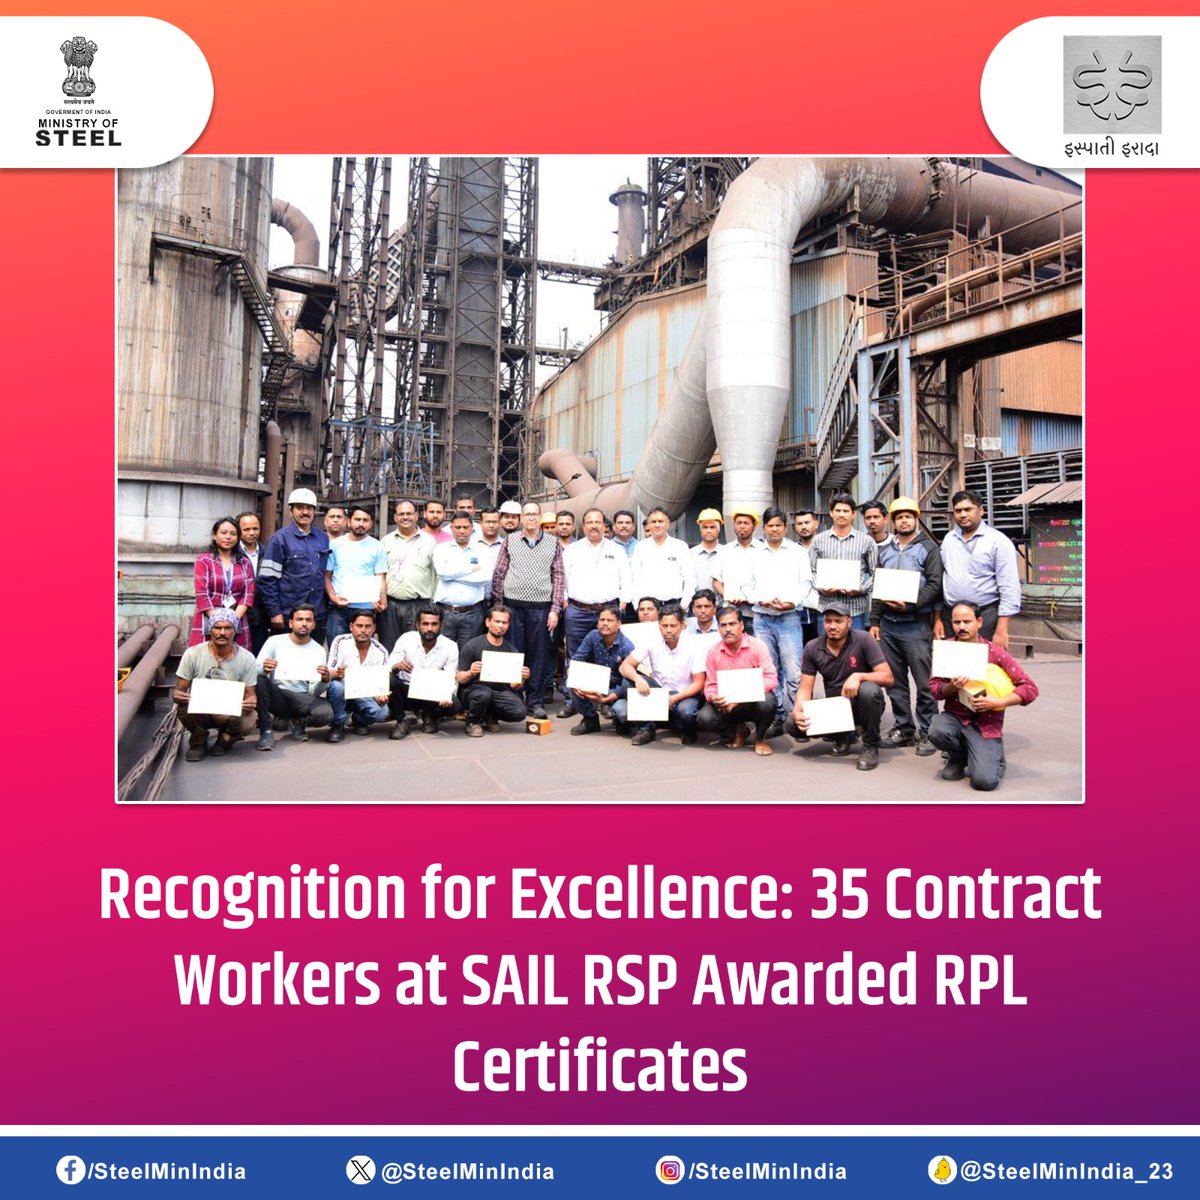 Celebrating dedication and skill! 🏆 35 contract workers across various departments at #SAIL #RSP receive RPL Certificates, a testament to their outstanding contributions.

#SAILRecognition #SkilledWorkforce